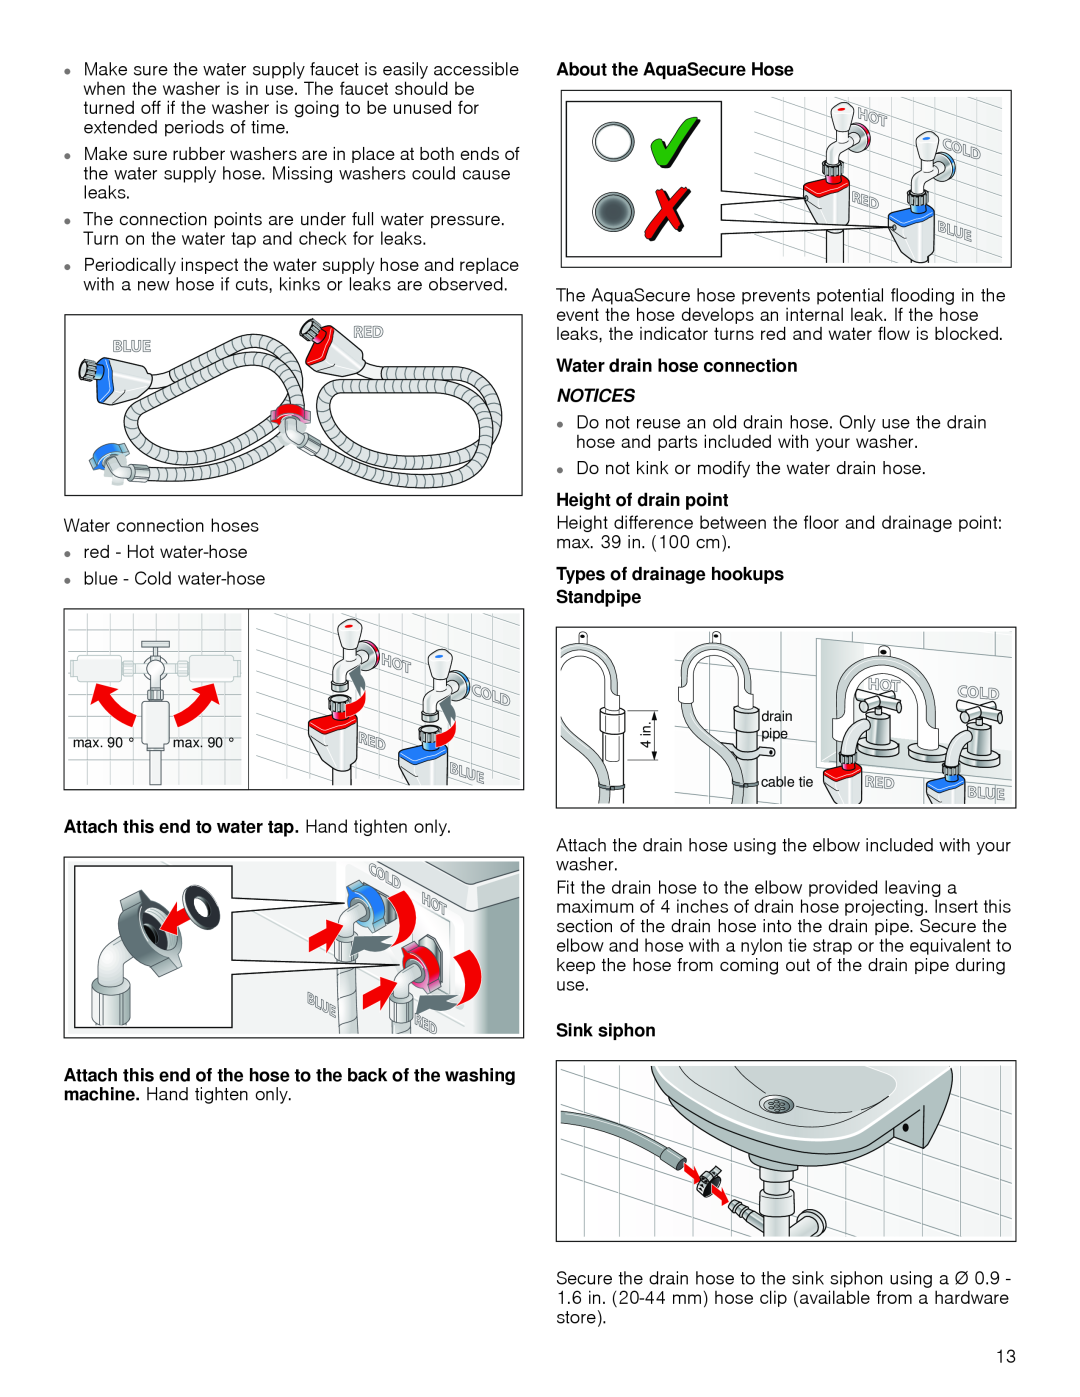 Bosch Appliances WAP24201UC manual Attach this end to water tap. Hand tighten only, About the AquaSecure Hose, Sink siphon 